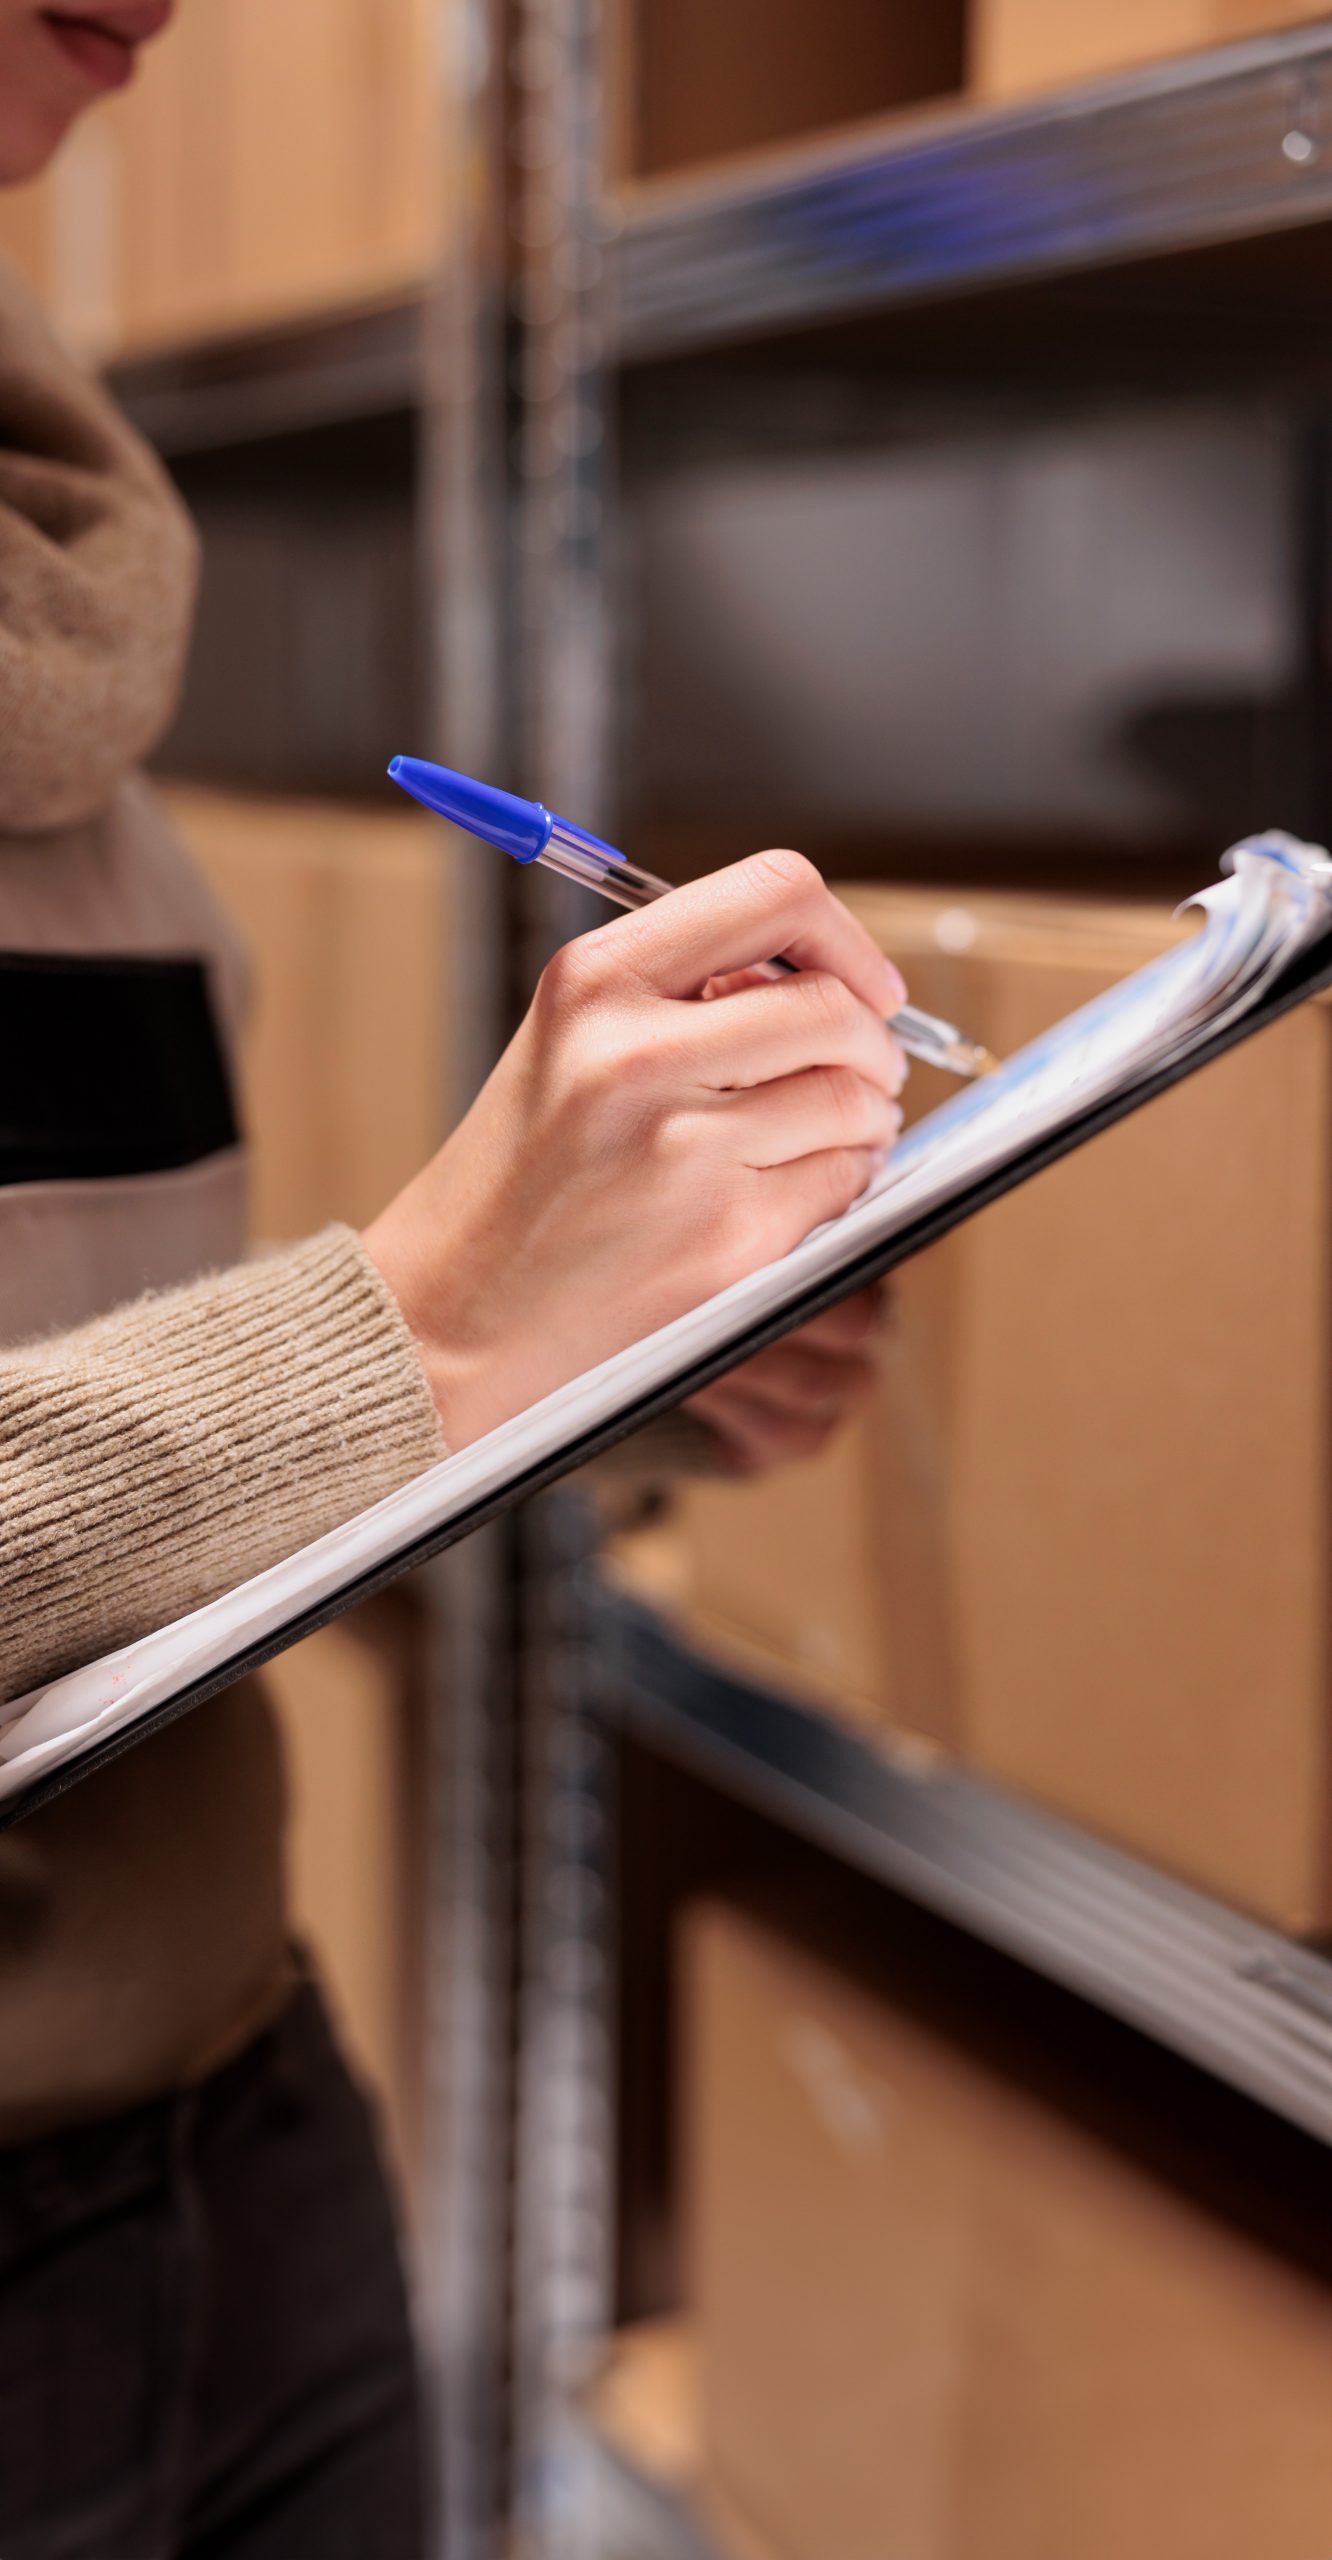 post-office-warehouse-employee-searching-parcel-checking-postal-form-young-caucasian-woman-supervising-cardboard-boxes-mail-sorting-center-writing-clipboard-close-up-1-scaled Expand your Amazon Business to Europe